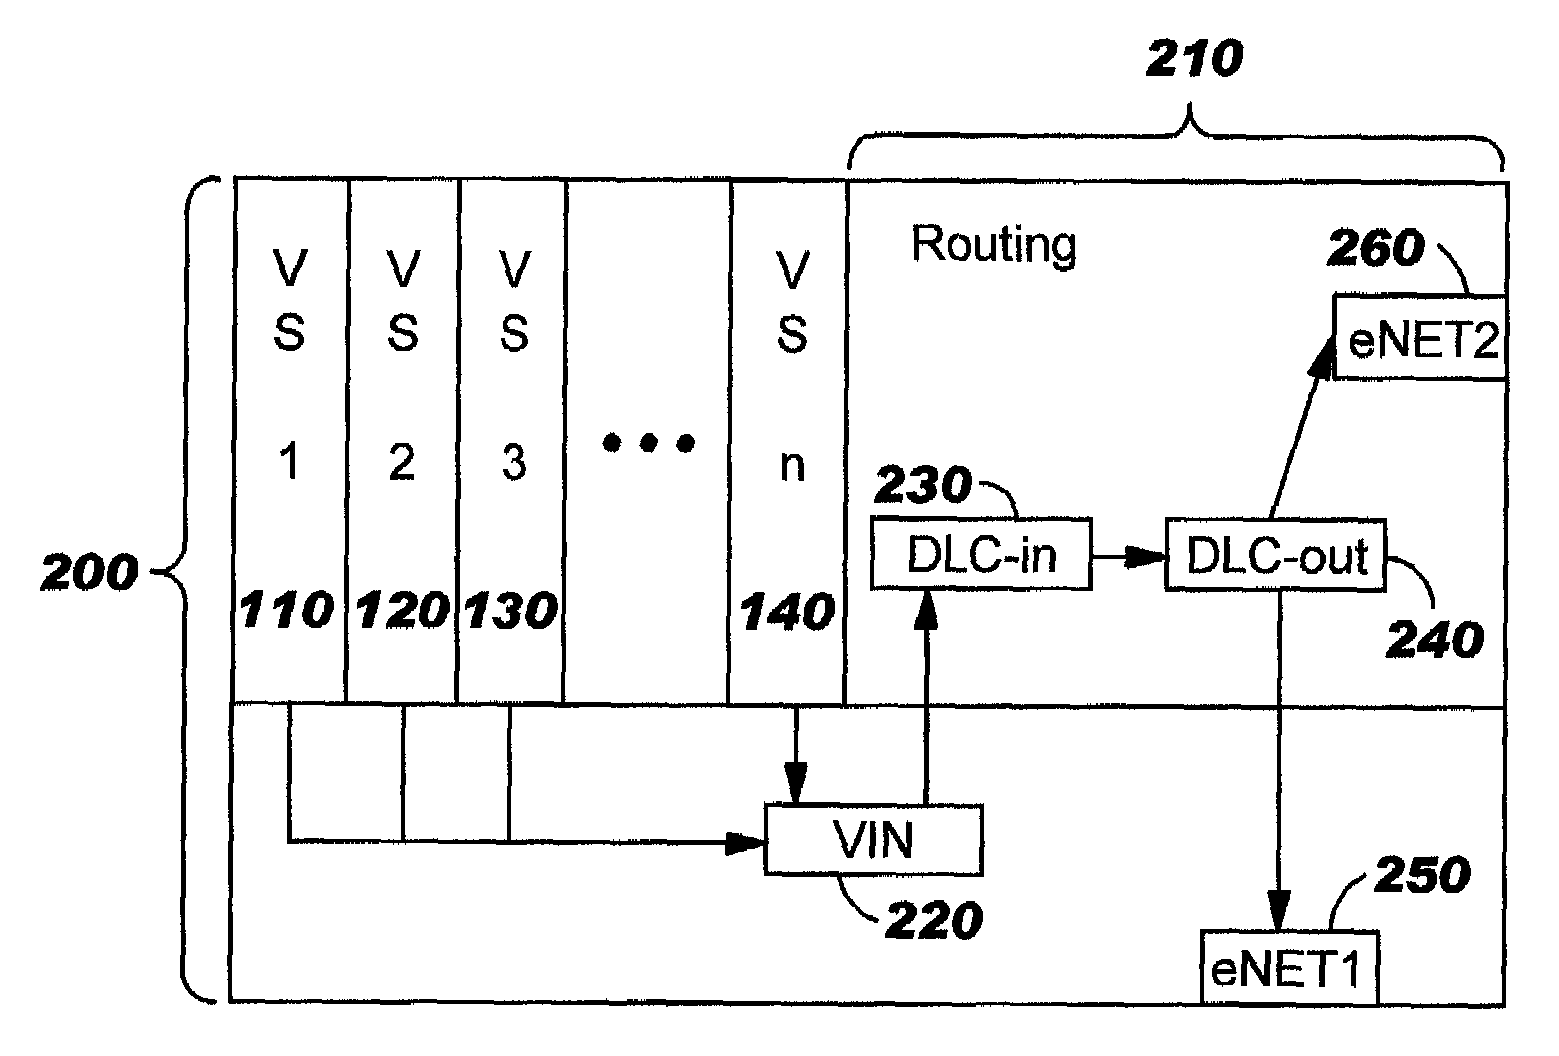 Fast path routing in a large-scale virtual server computing environment